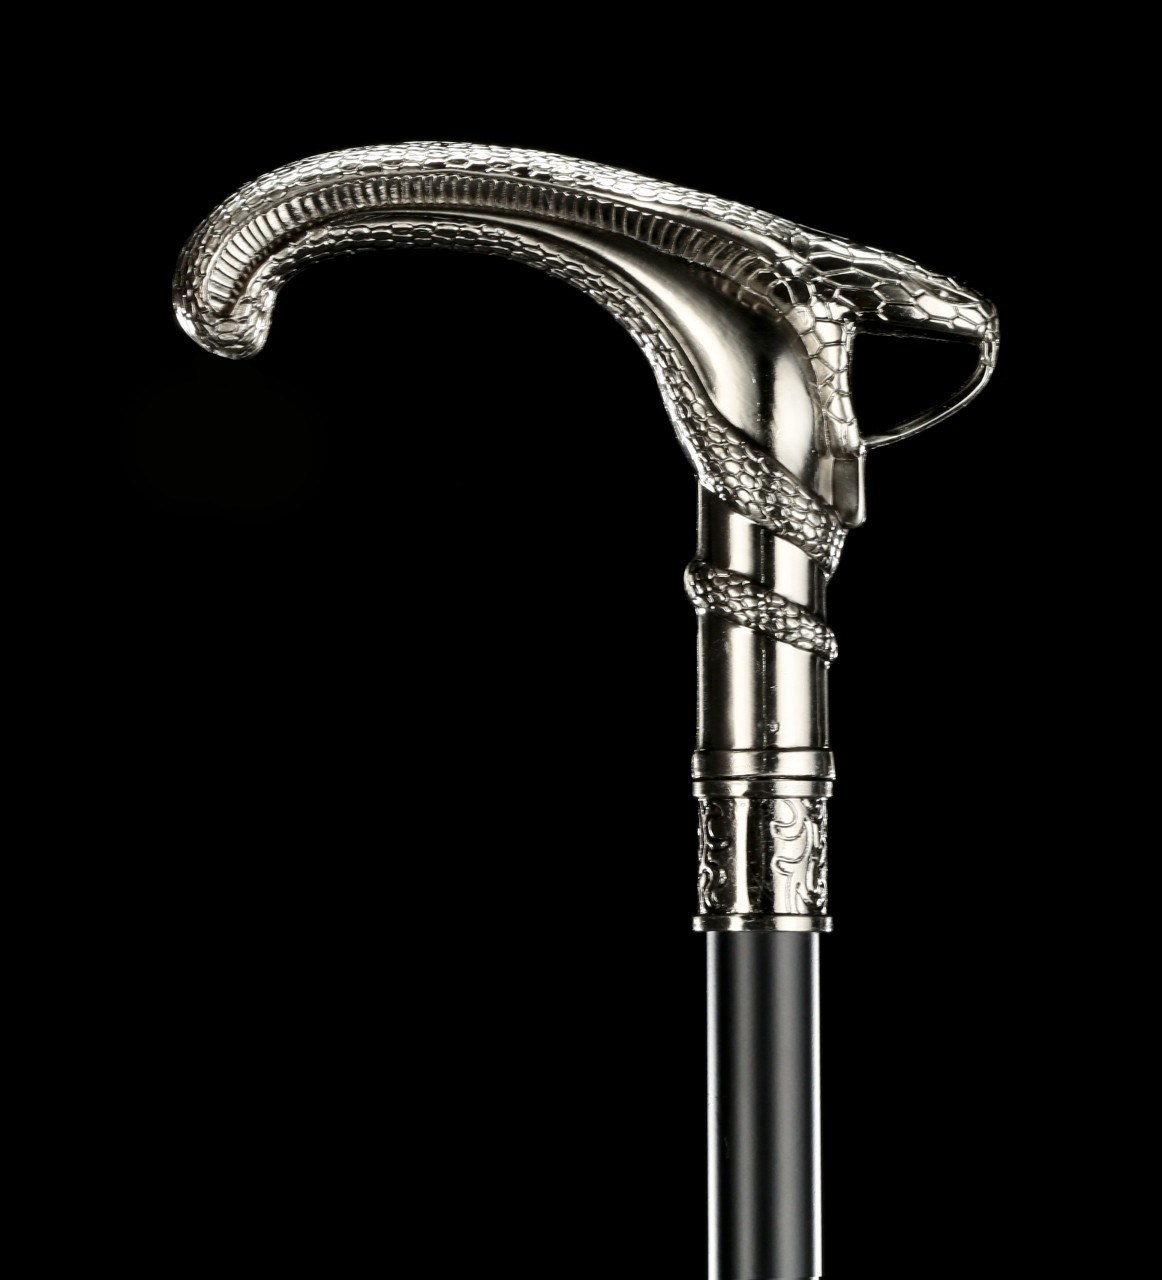 Swaggering Cane - Snake Handle - Metal